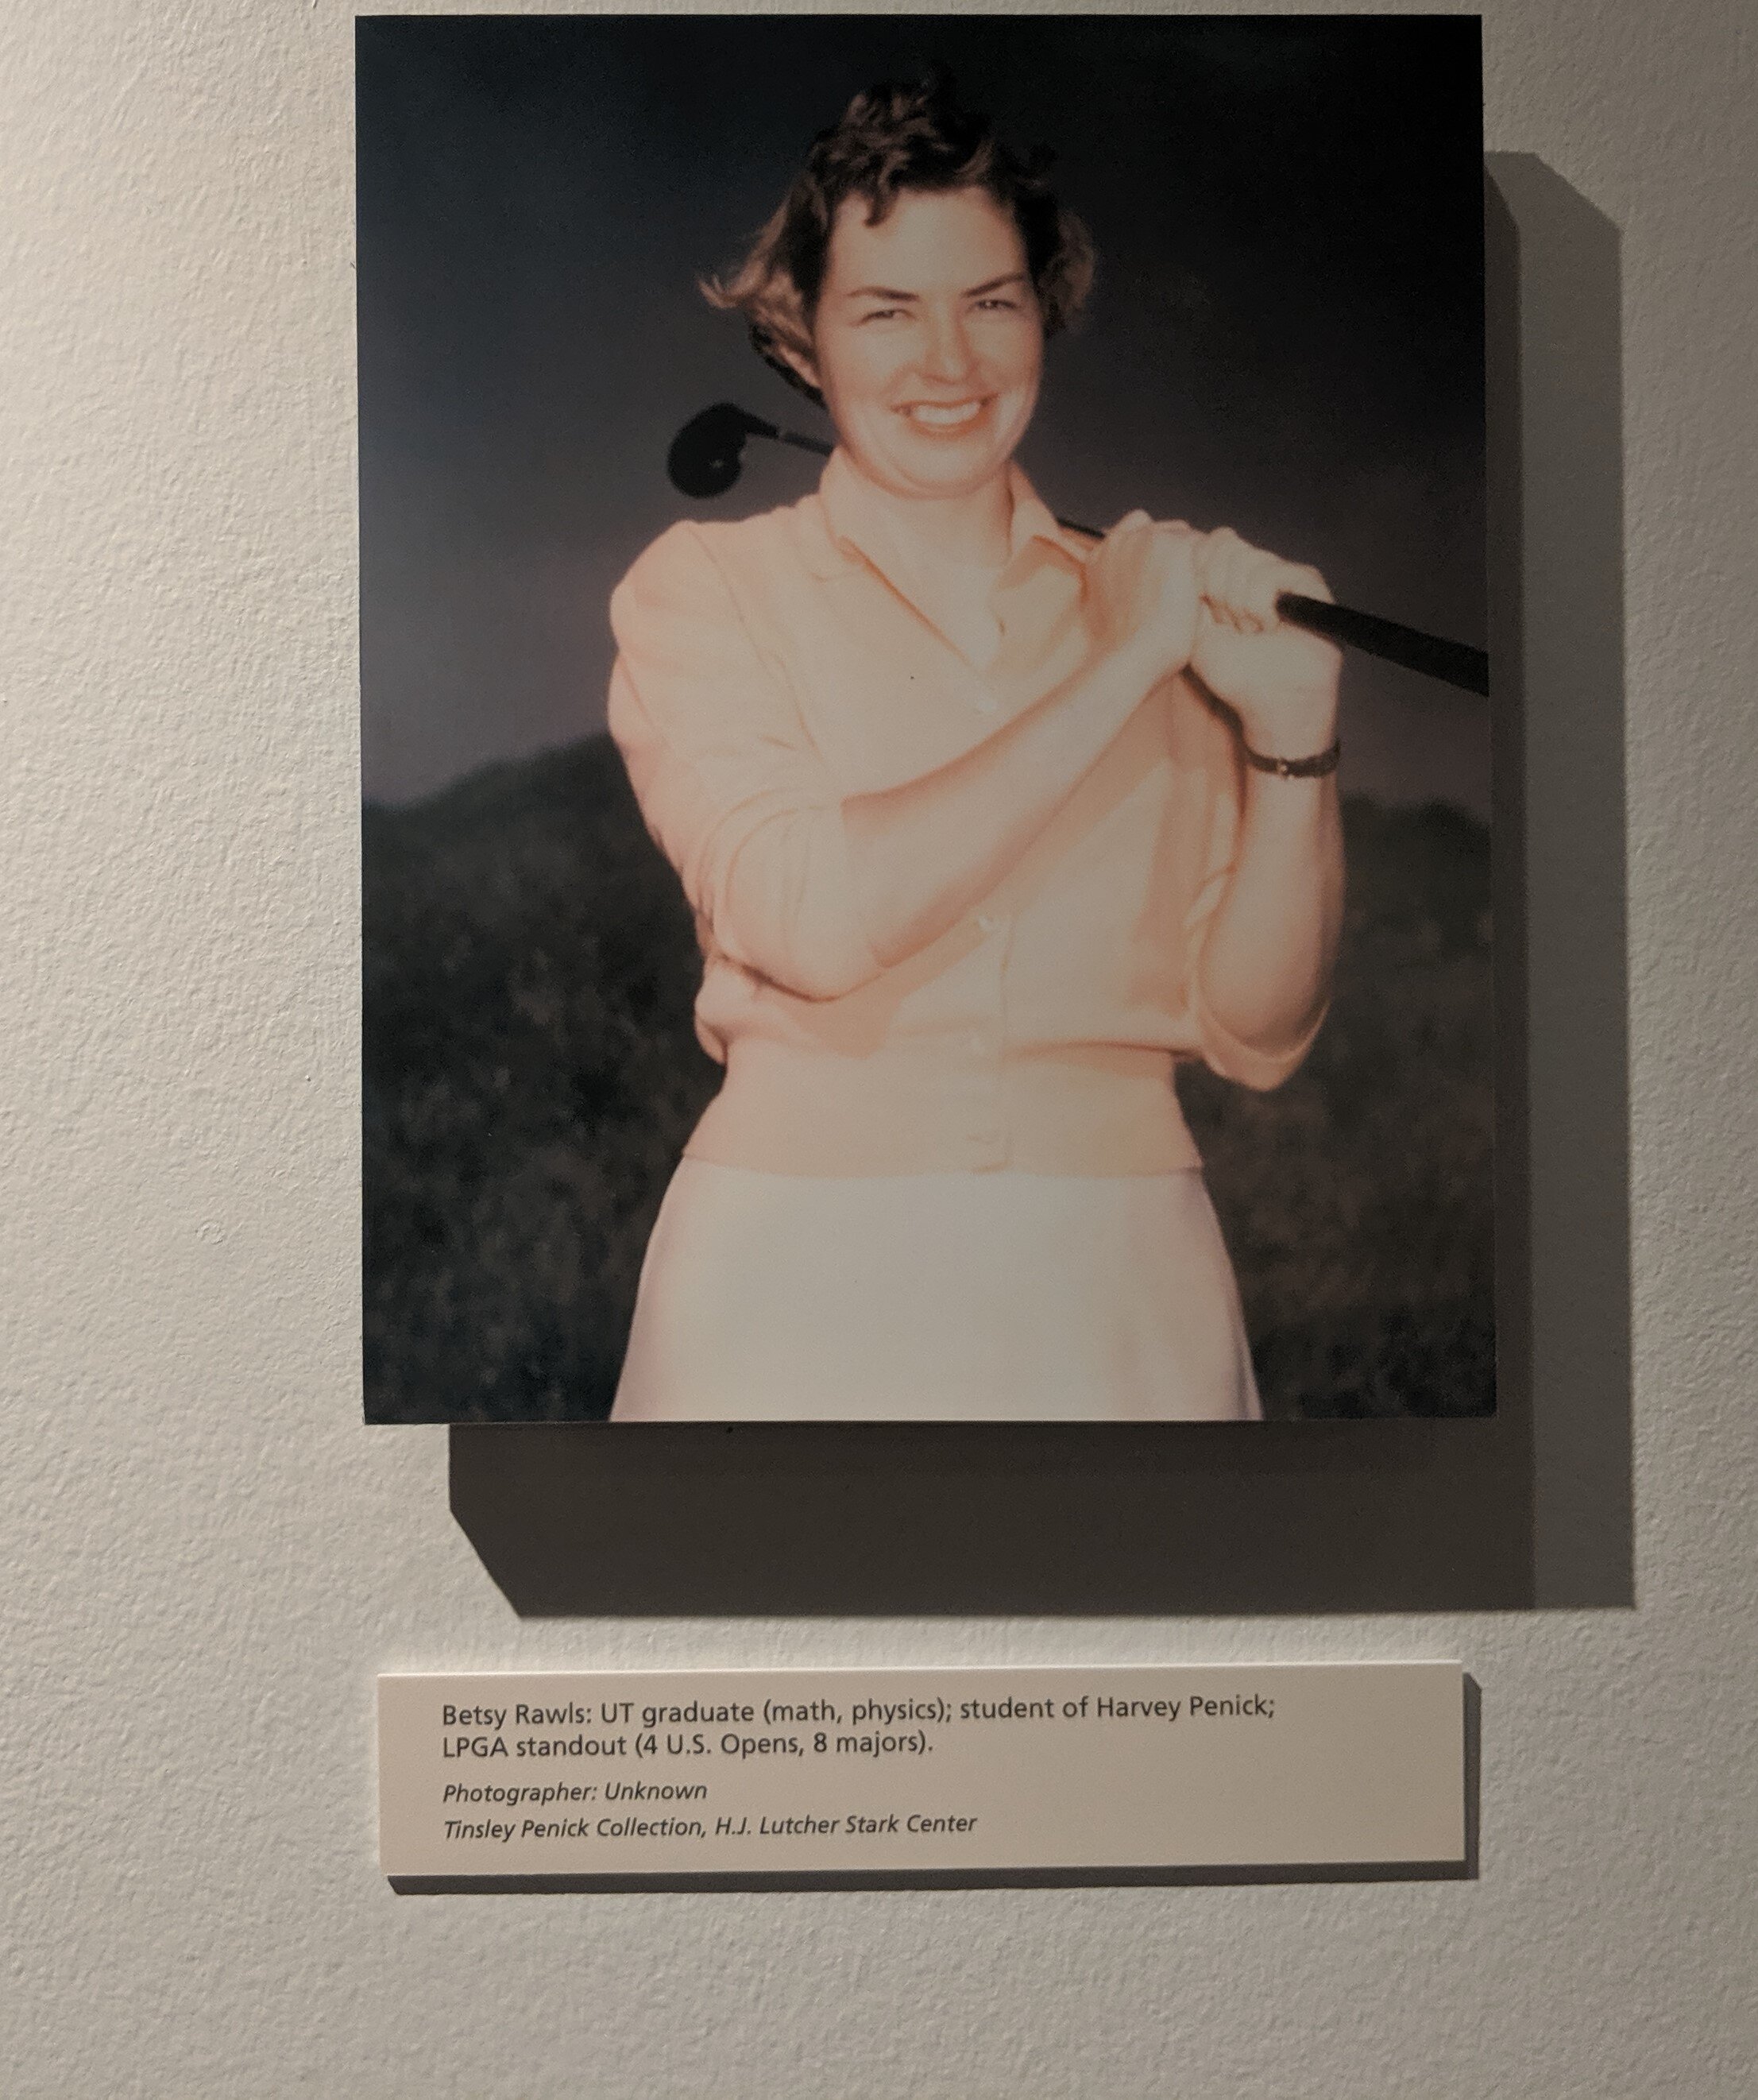  Betsy Rawls is a freshman at Texas and studies physics. Harvey Penick molds her into one of the greatest golfers of all time. Betsy loved Harvey. &nbsp;She said, "his interest in students for their own sake rather than for the sake of his own reflec